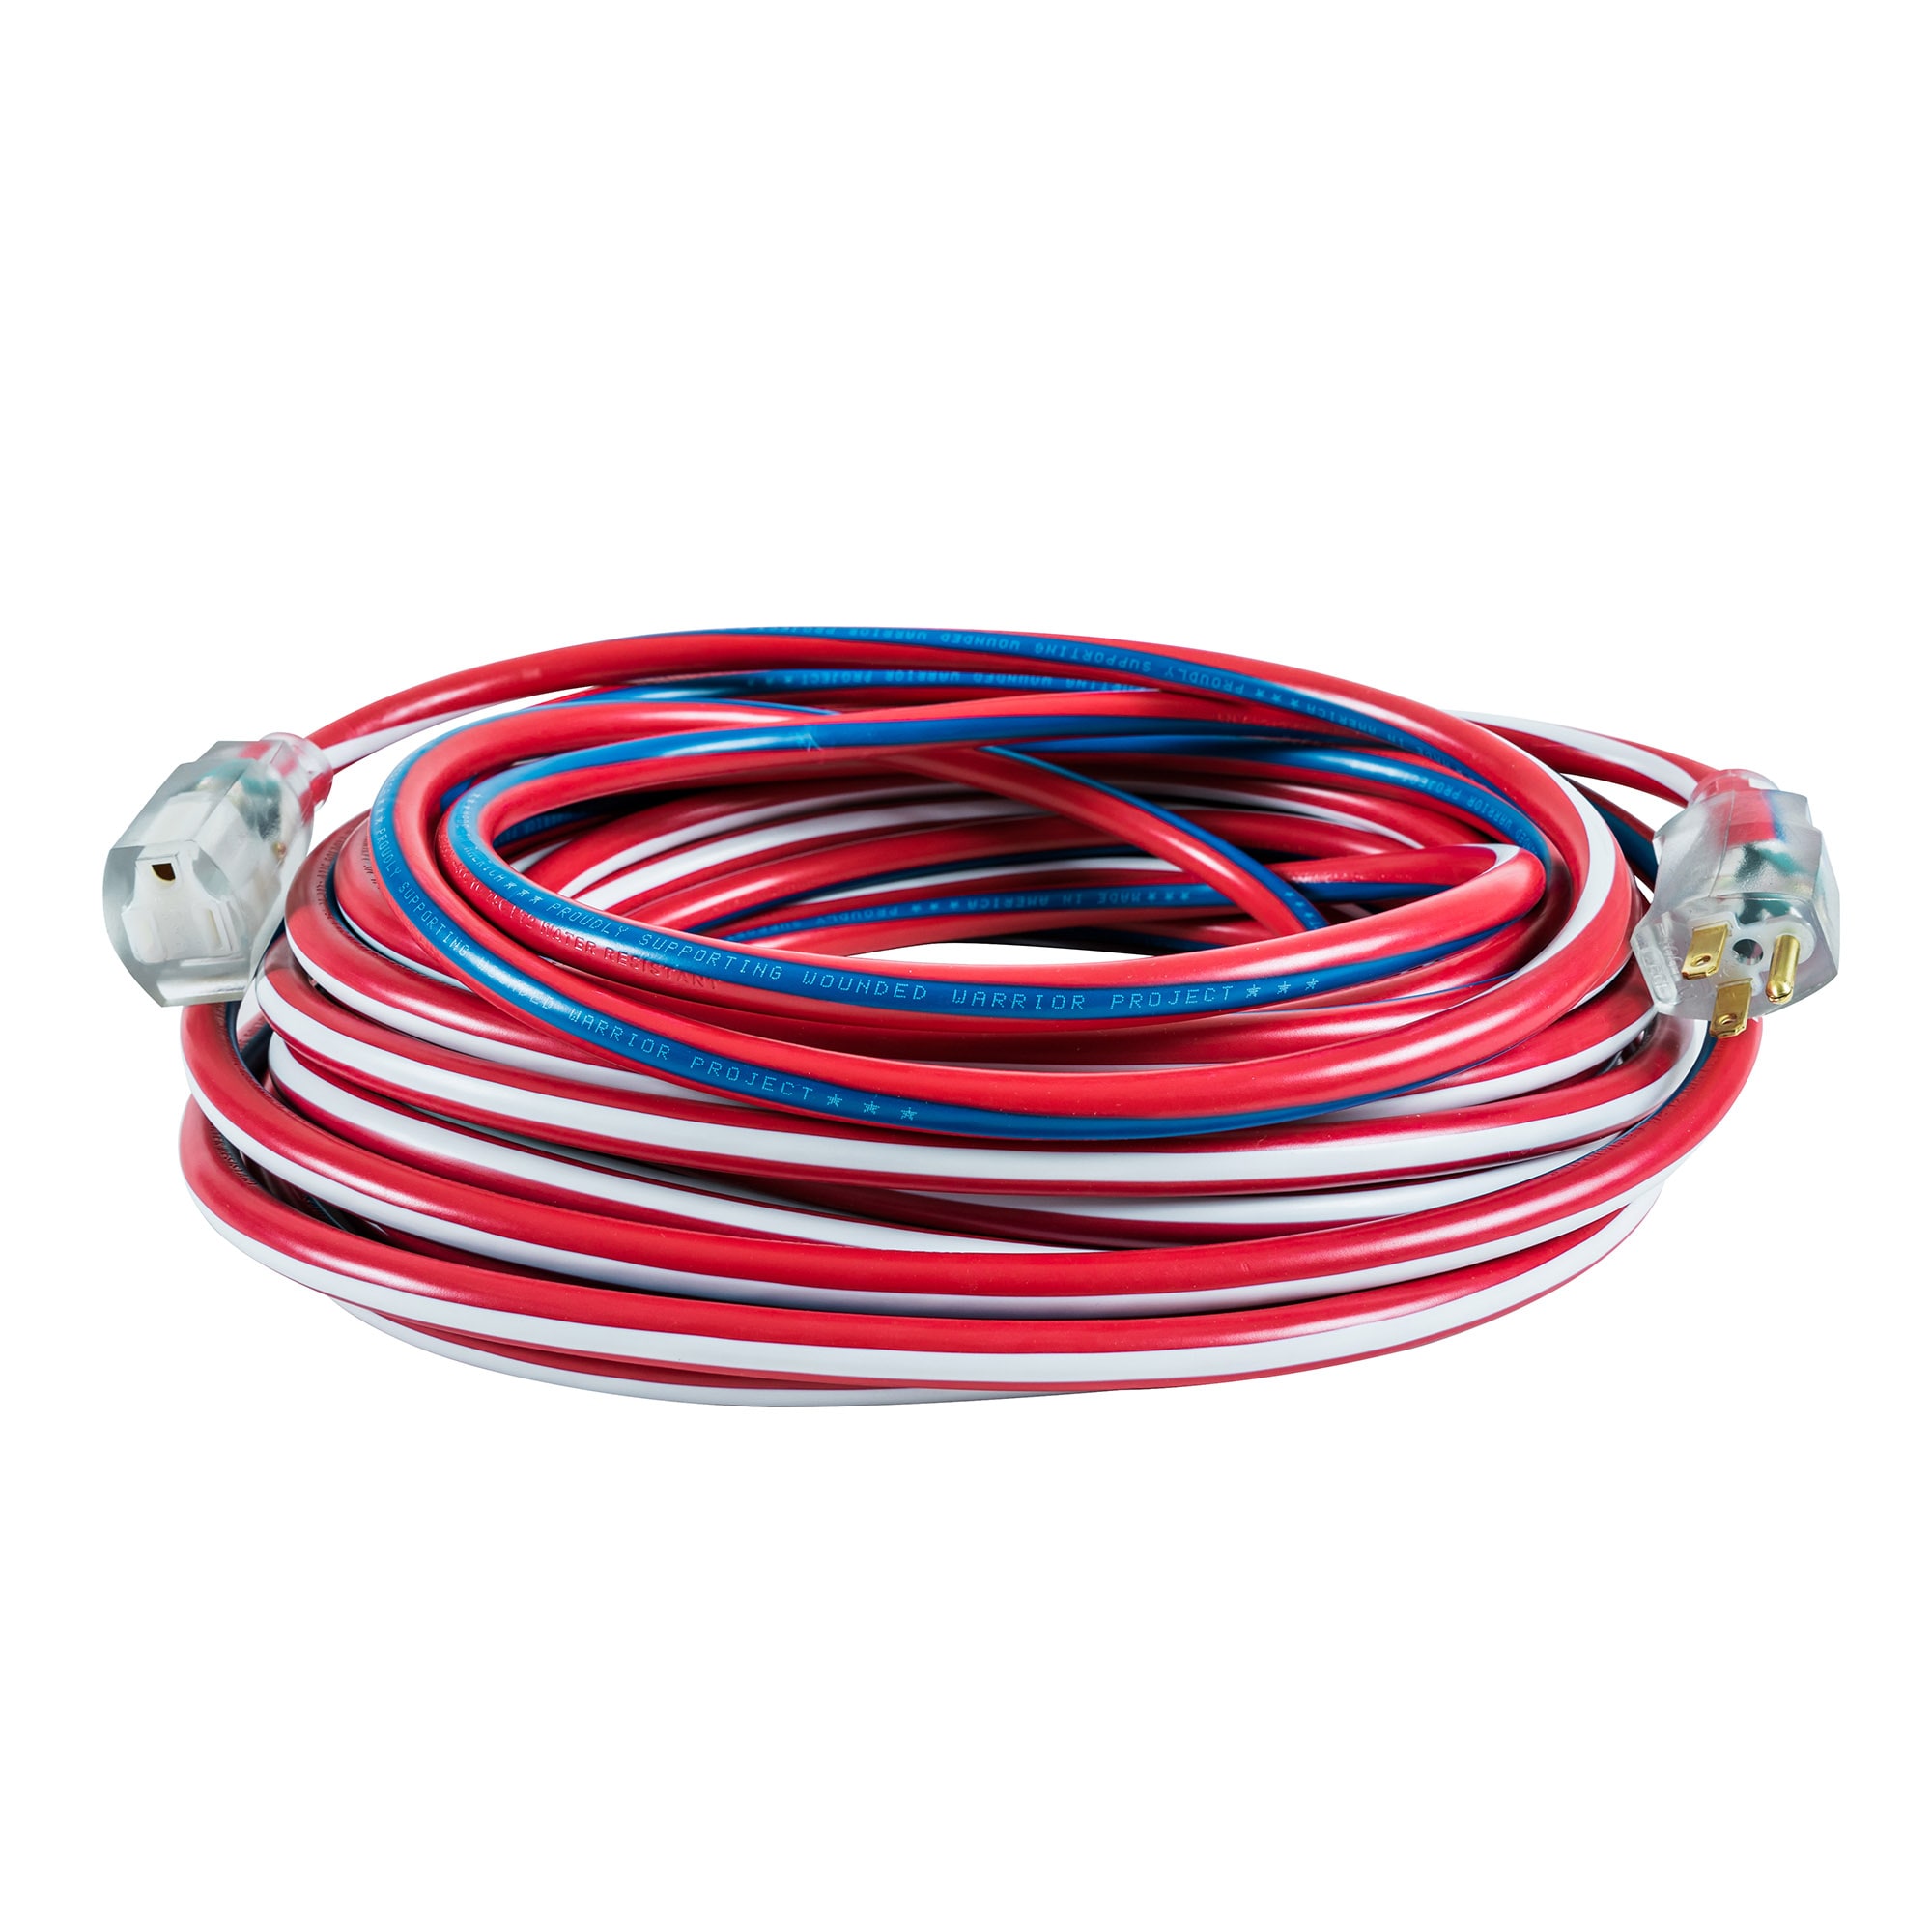 Southwire 12/3 25' SJTW R/W/B Lighted End Extension Cord - 2547SWUSA1